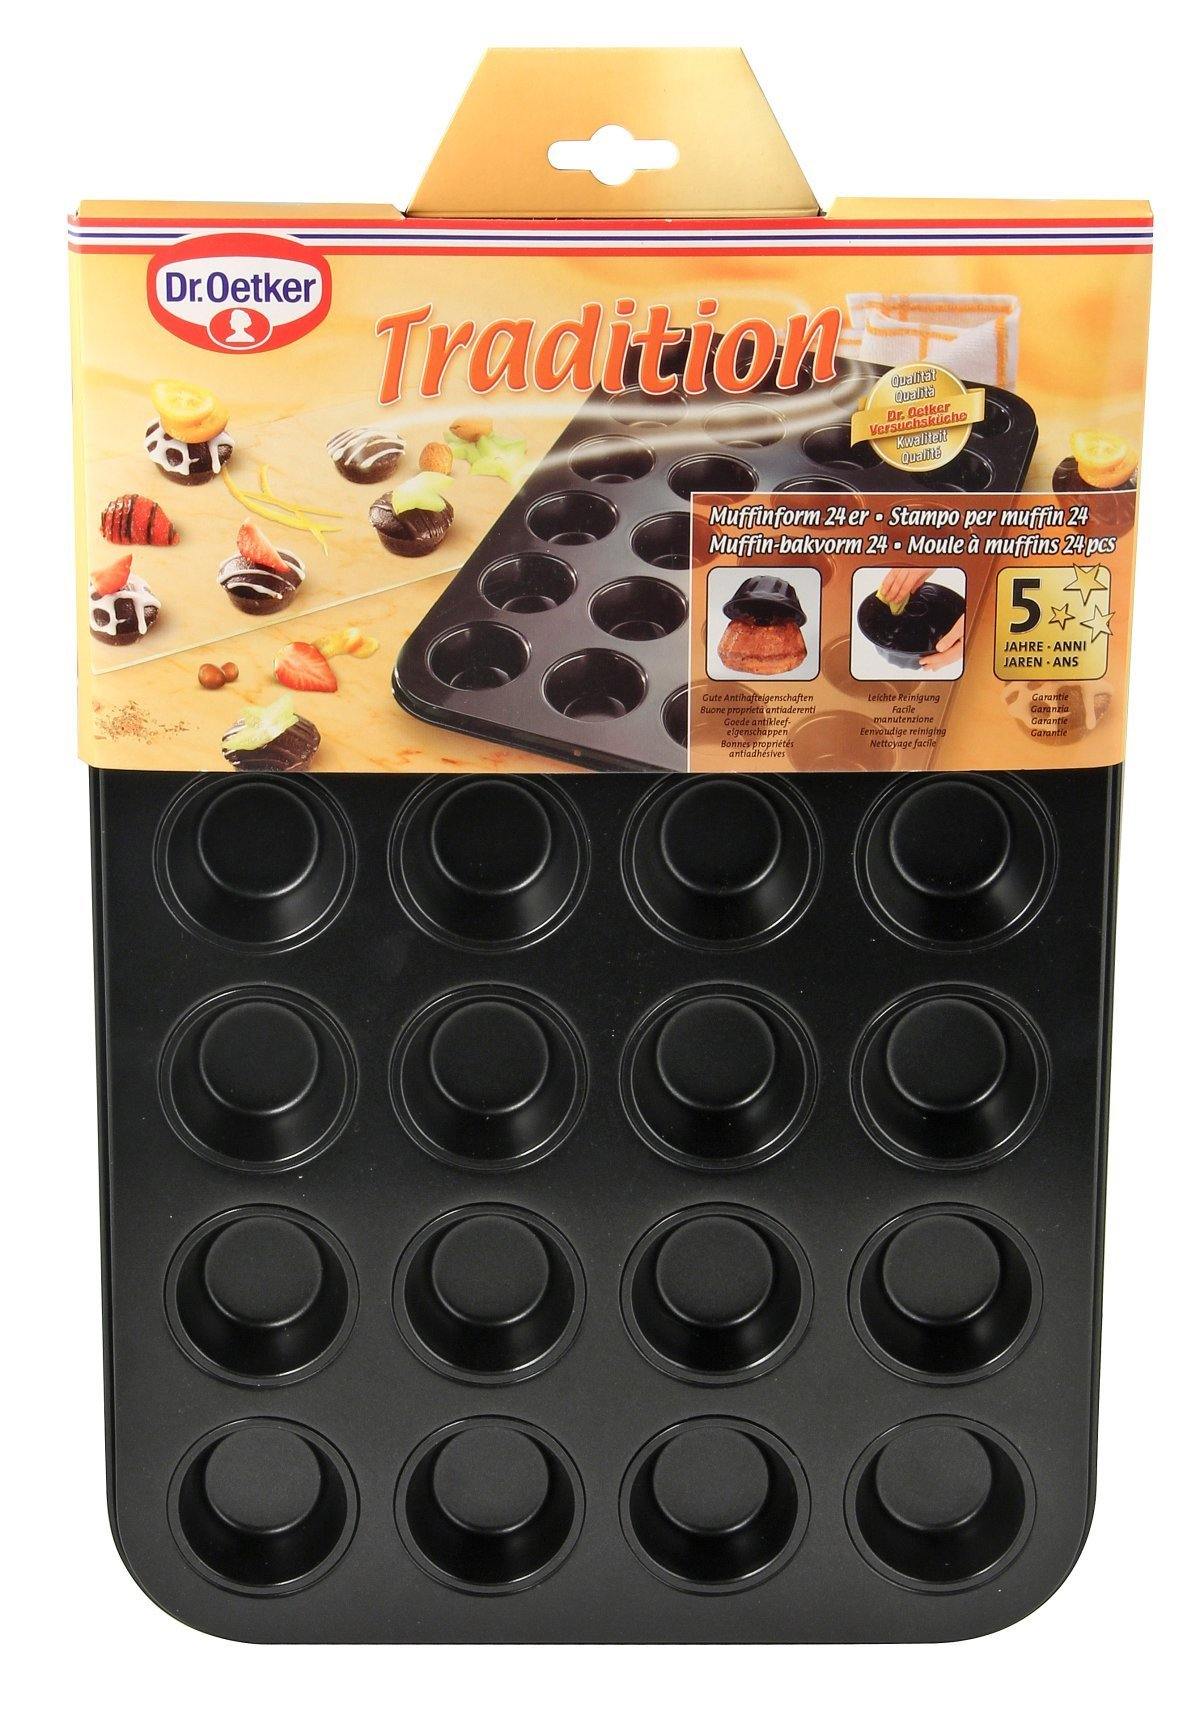 Dr. Oetker "Tradition" 24-Piece Non-Stick Bakeware Muffin Tin - Whole and All